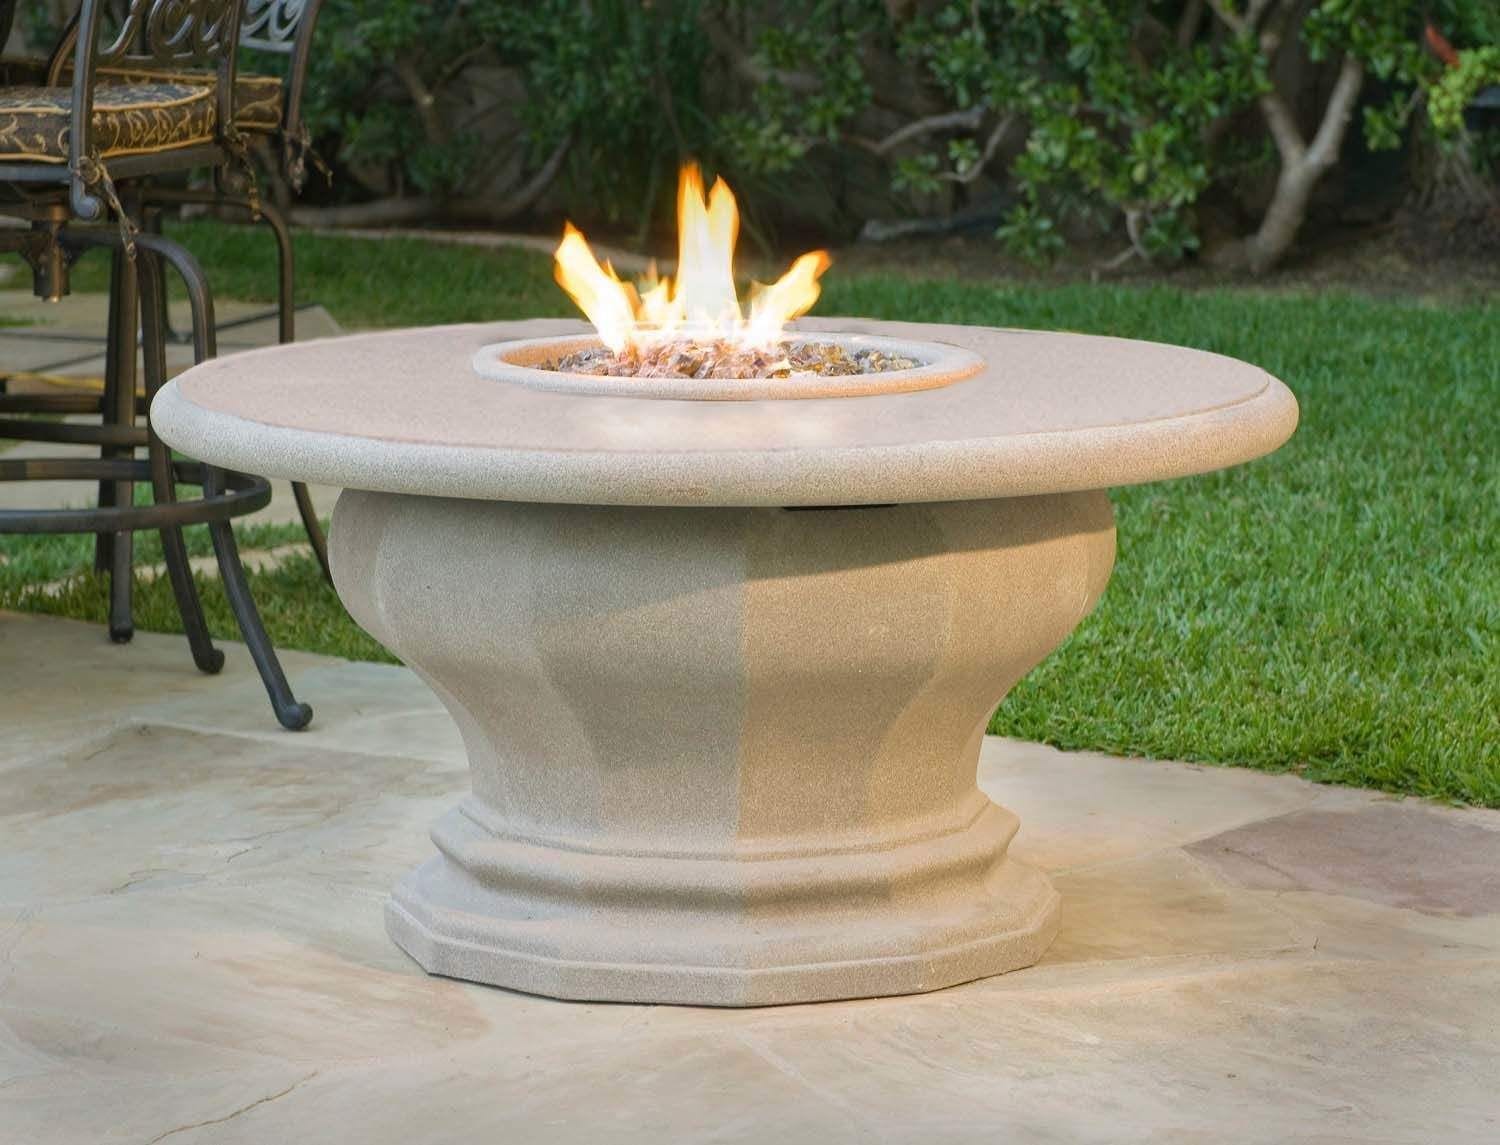 American Fyre Designs Fire Table American Fyre Design - 24 Inch Round Inverted Firetable with Concrete Table Top